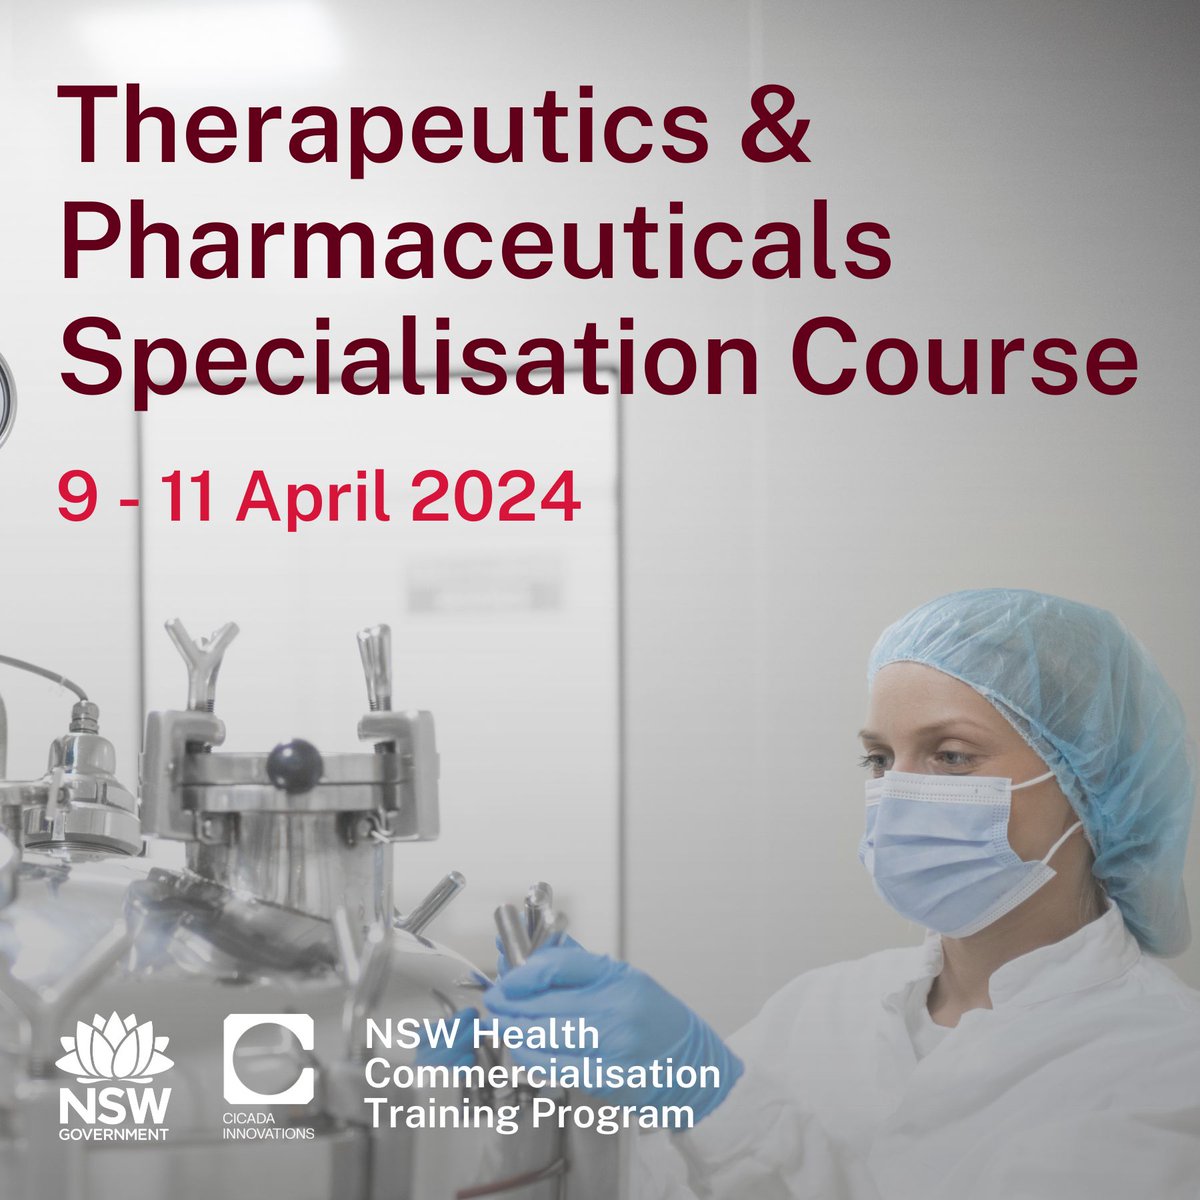 📣Last call to be part of a group of forward-thinkers in the @NSWHealth Commercialisation Training Program's #Pharmaceuticals and #Therapeutics course. Delivered in partnership with industry expert @‌Sydney Pharmacy School. Learn from the experts. cicadainnovations.com/programs/ctp-s…